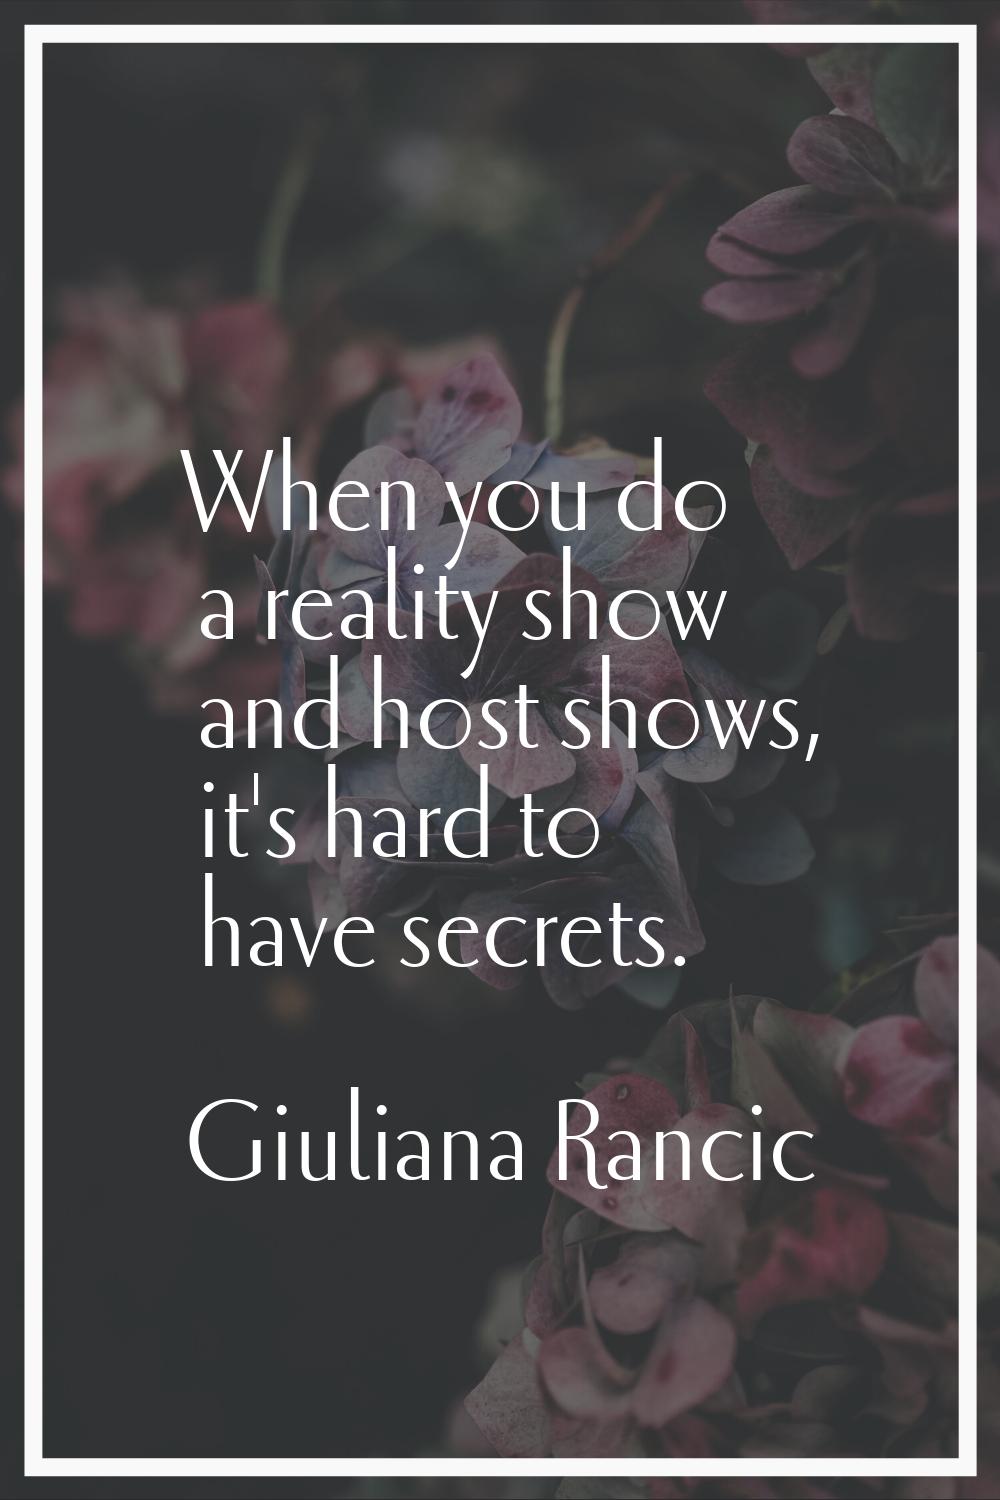 When you do a reality show and host shows, it's hard to have secrets.